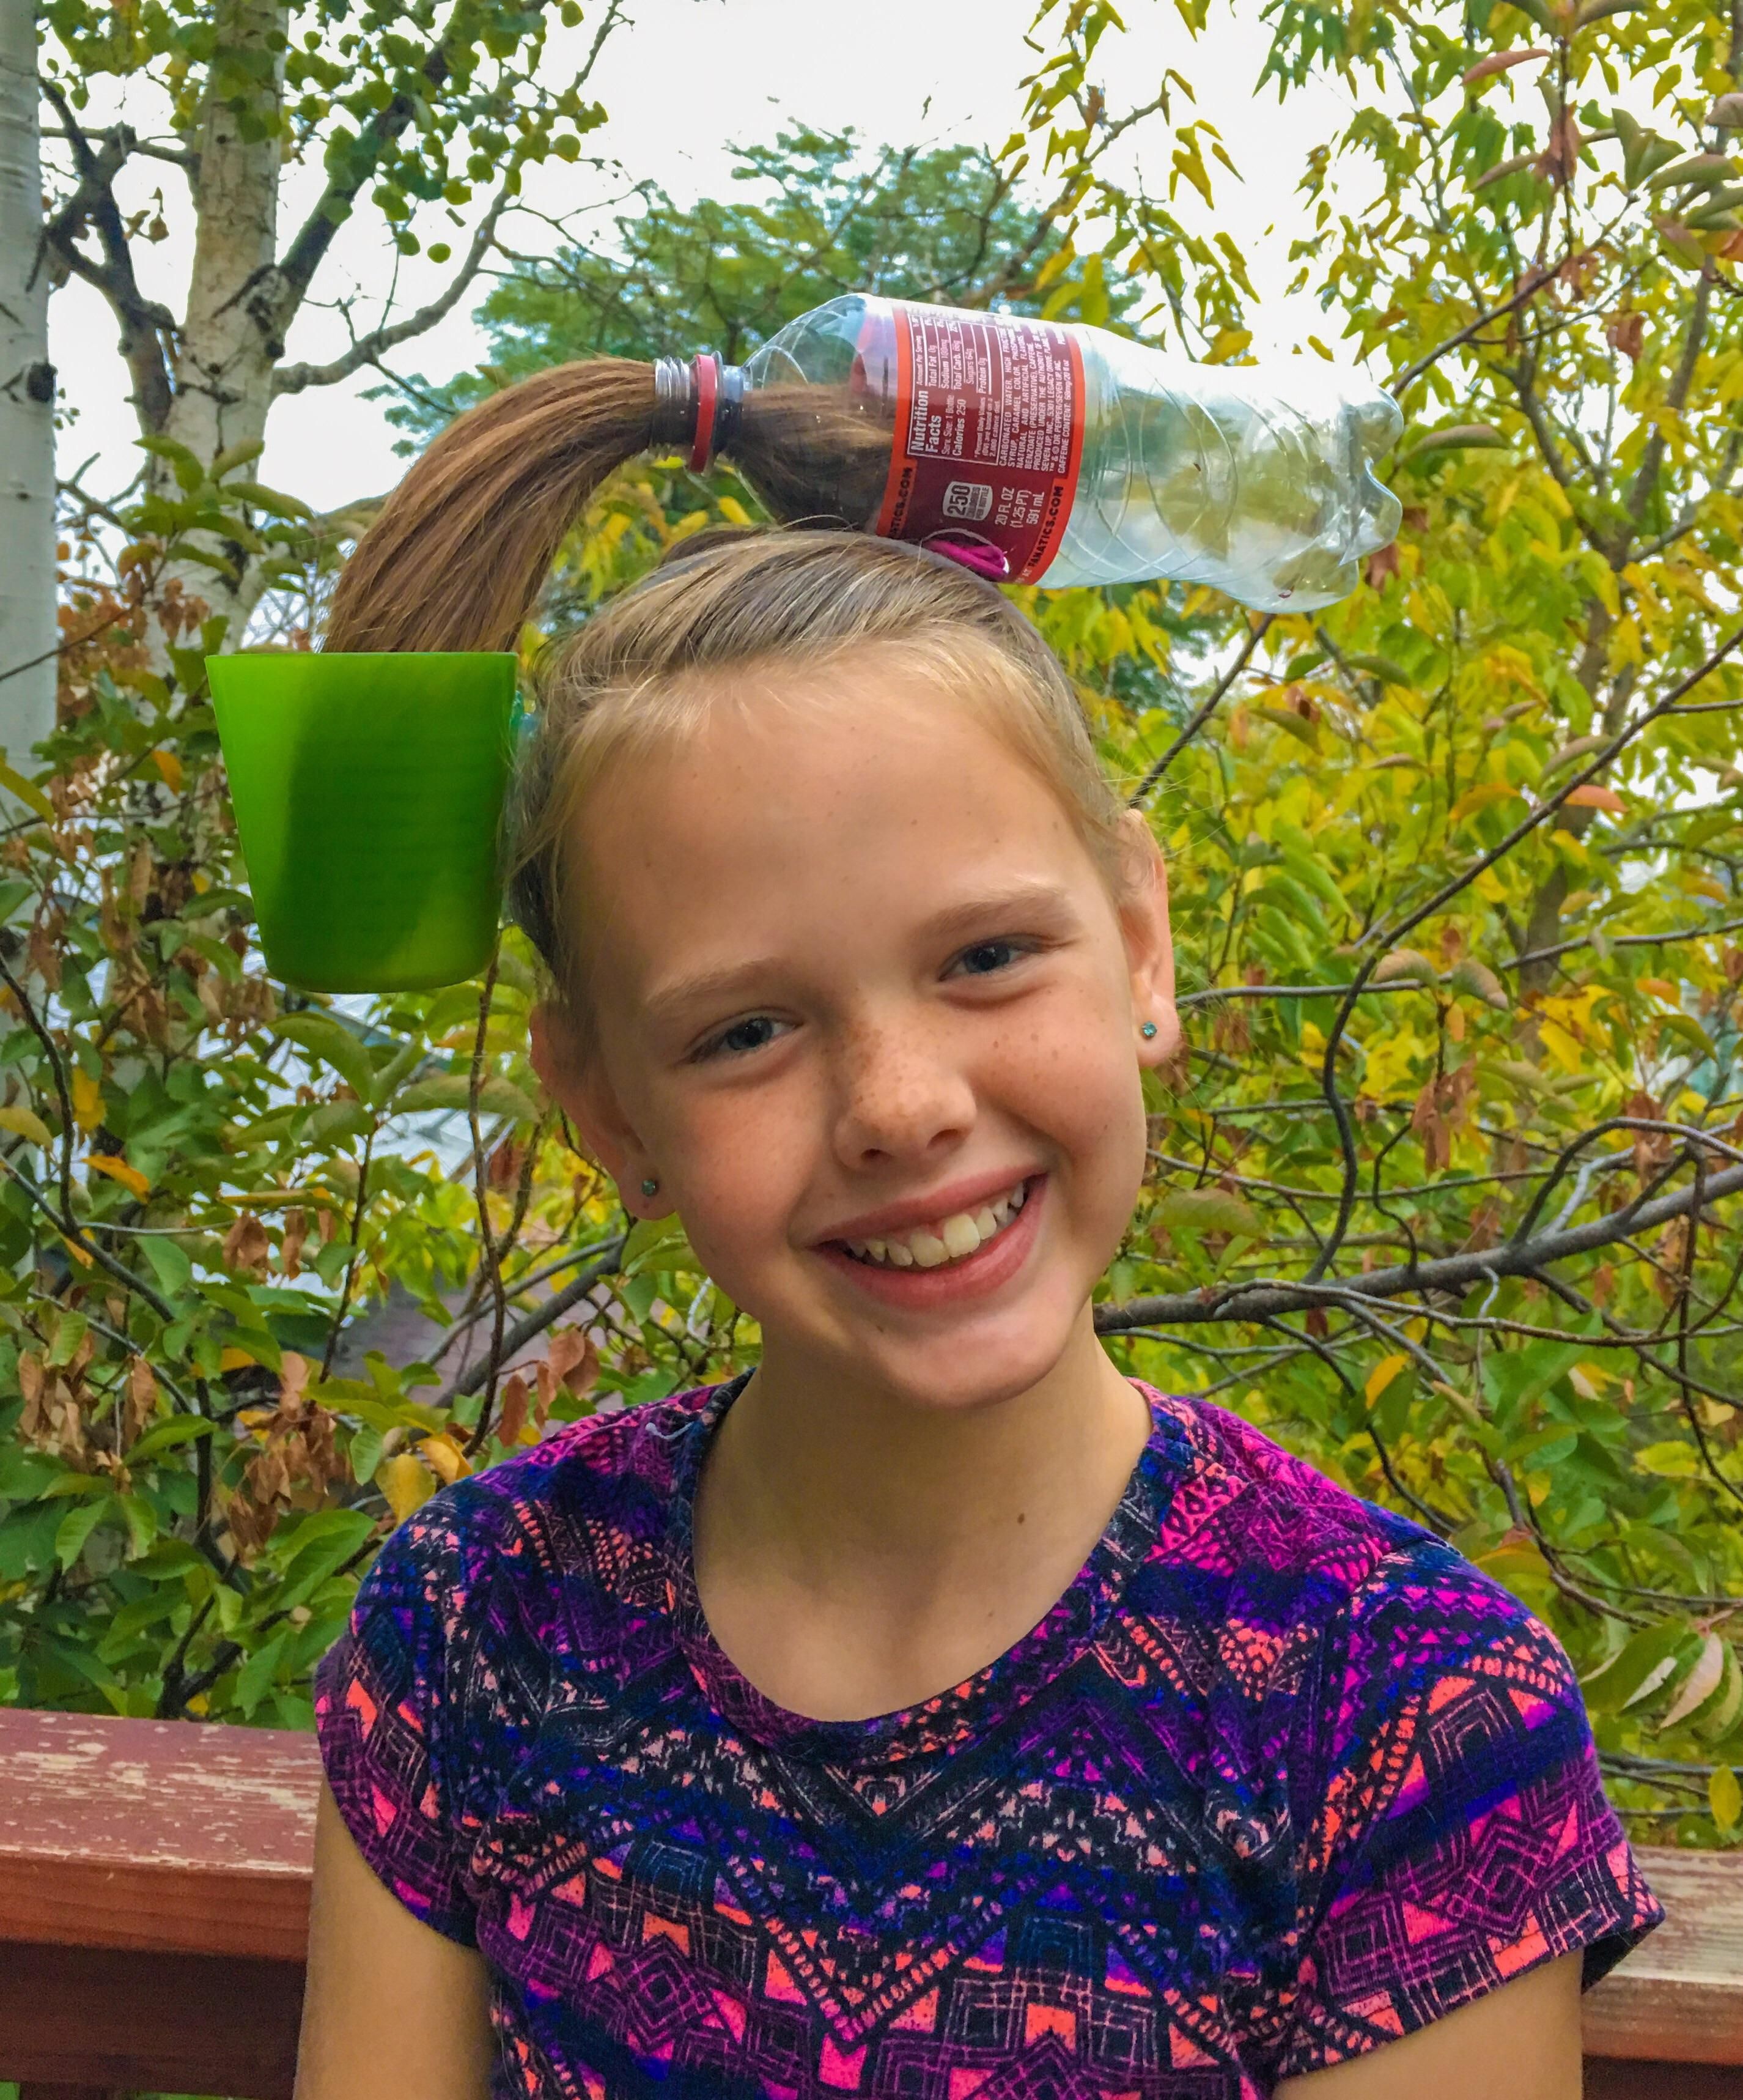 My stepdaughter has crazy hair day at school today, how did we do?